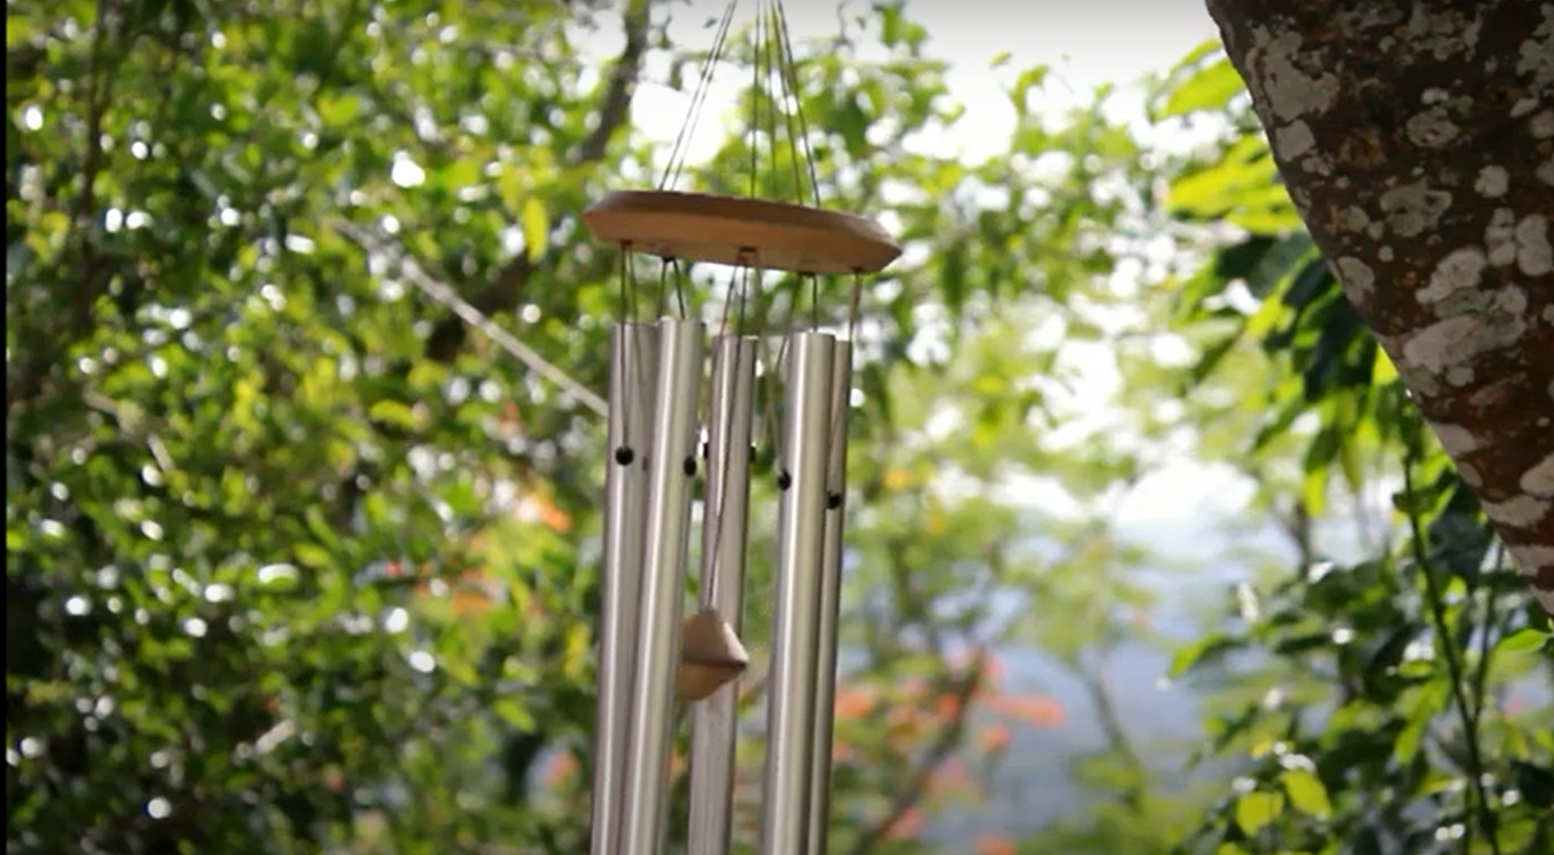 Method 2. Hanging Wind Chimes from a Tree Branch